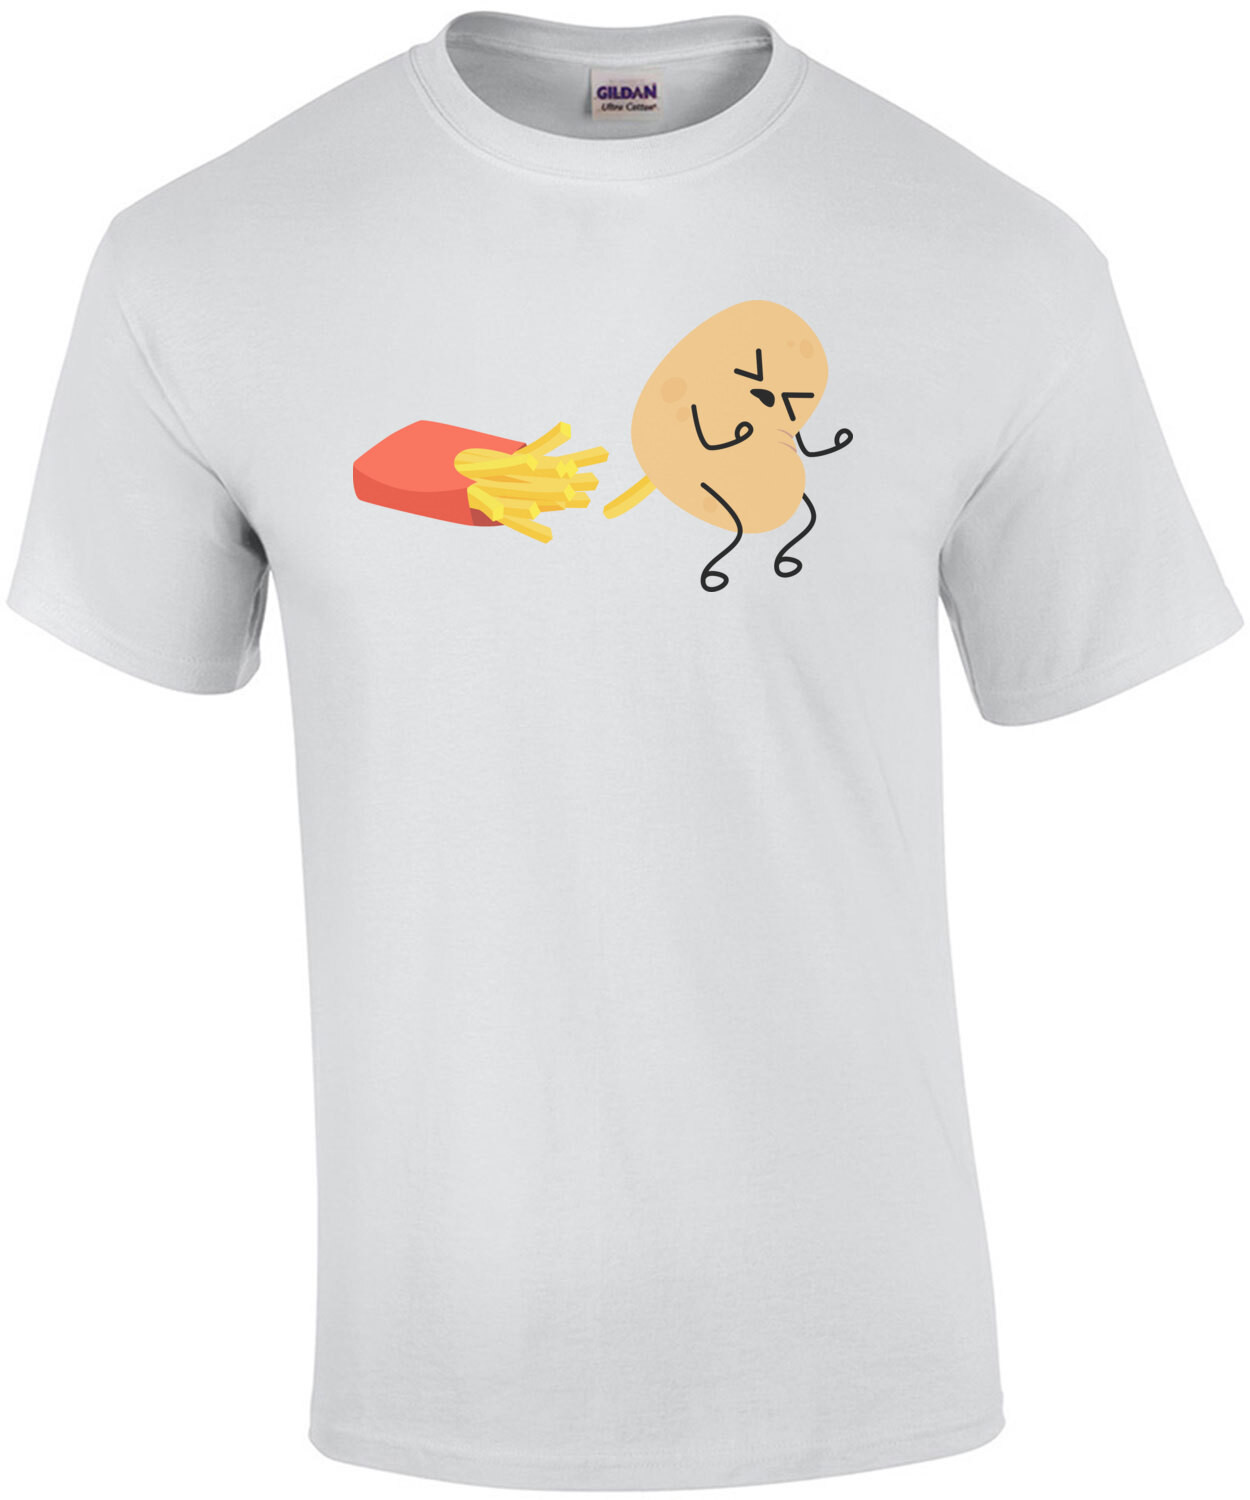 Potato pooping out french fry - How french fries are made - funny pun t-shirt